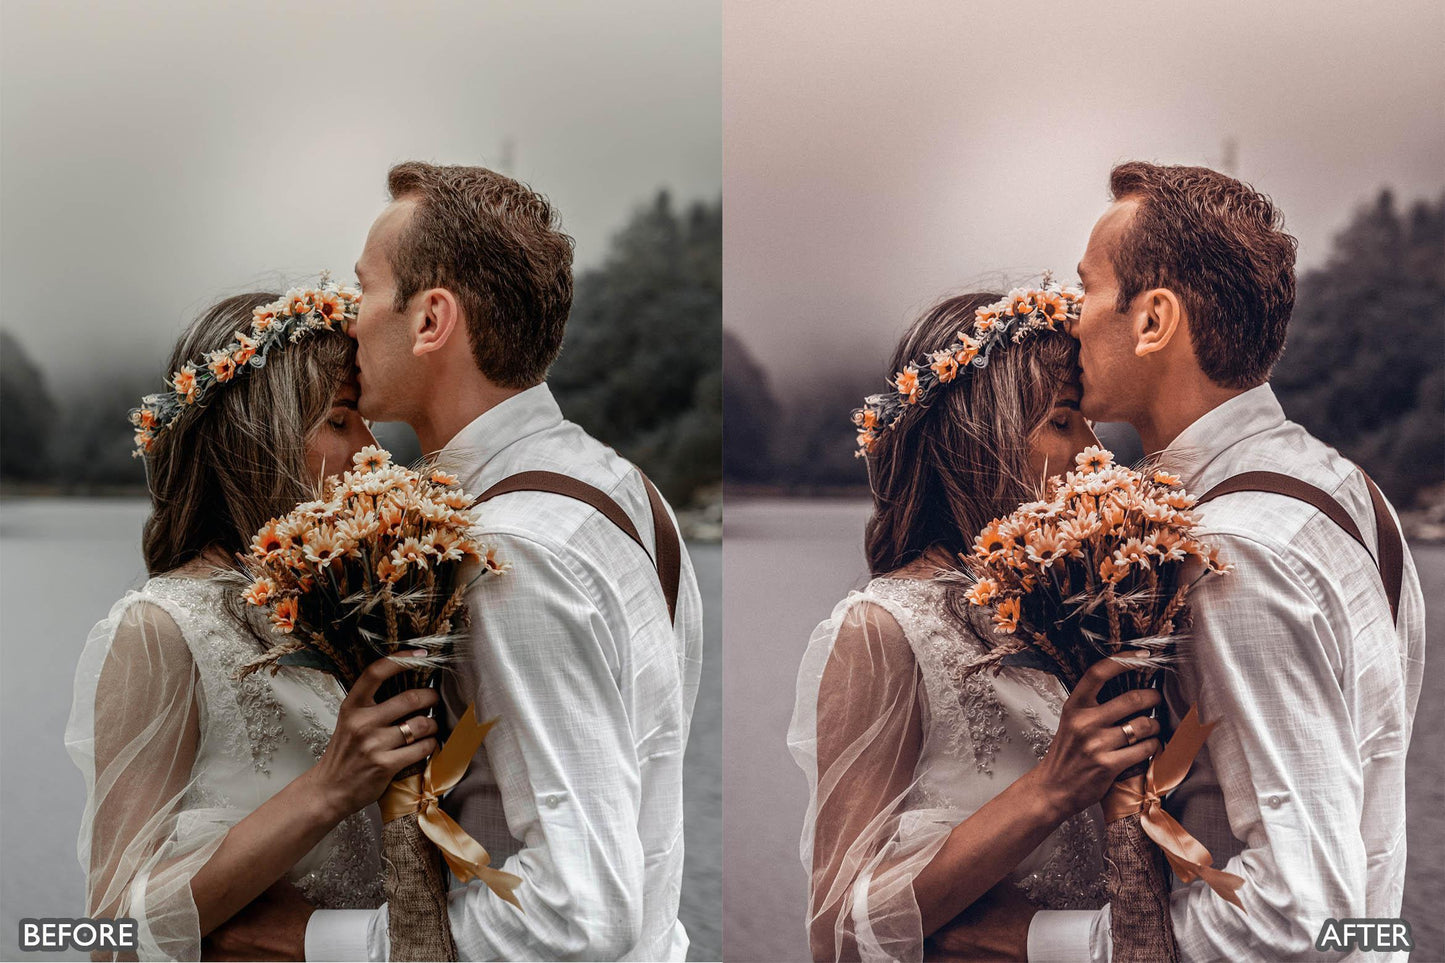 50 Gorgeous Lightroom Presets for Wedding Photography - adobe lightroom presets, Blogger presets, Cinematic Presets, instagram presets, lightroom presets, Minimalist presets, moody presets, Portrait presets, presets before and after, professional lightroom presets, Wedding Lightroom Presets Bundle - aaapresets.com